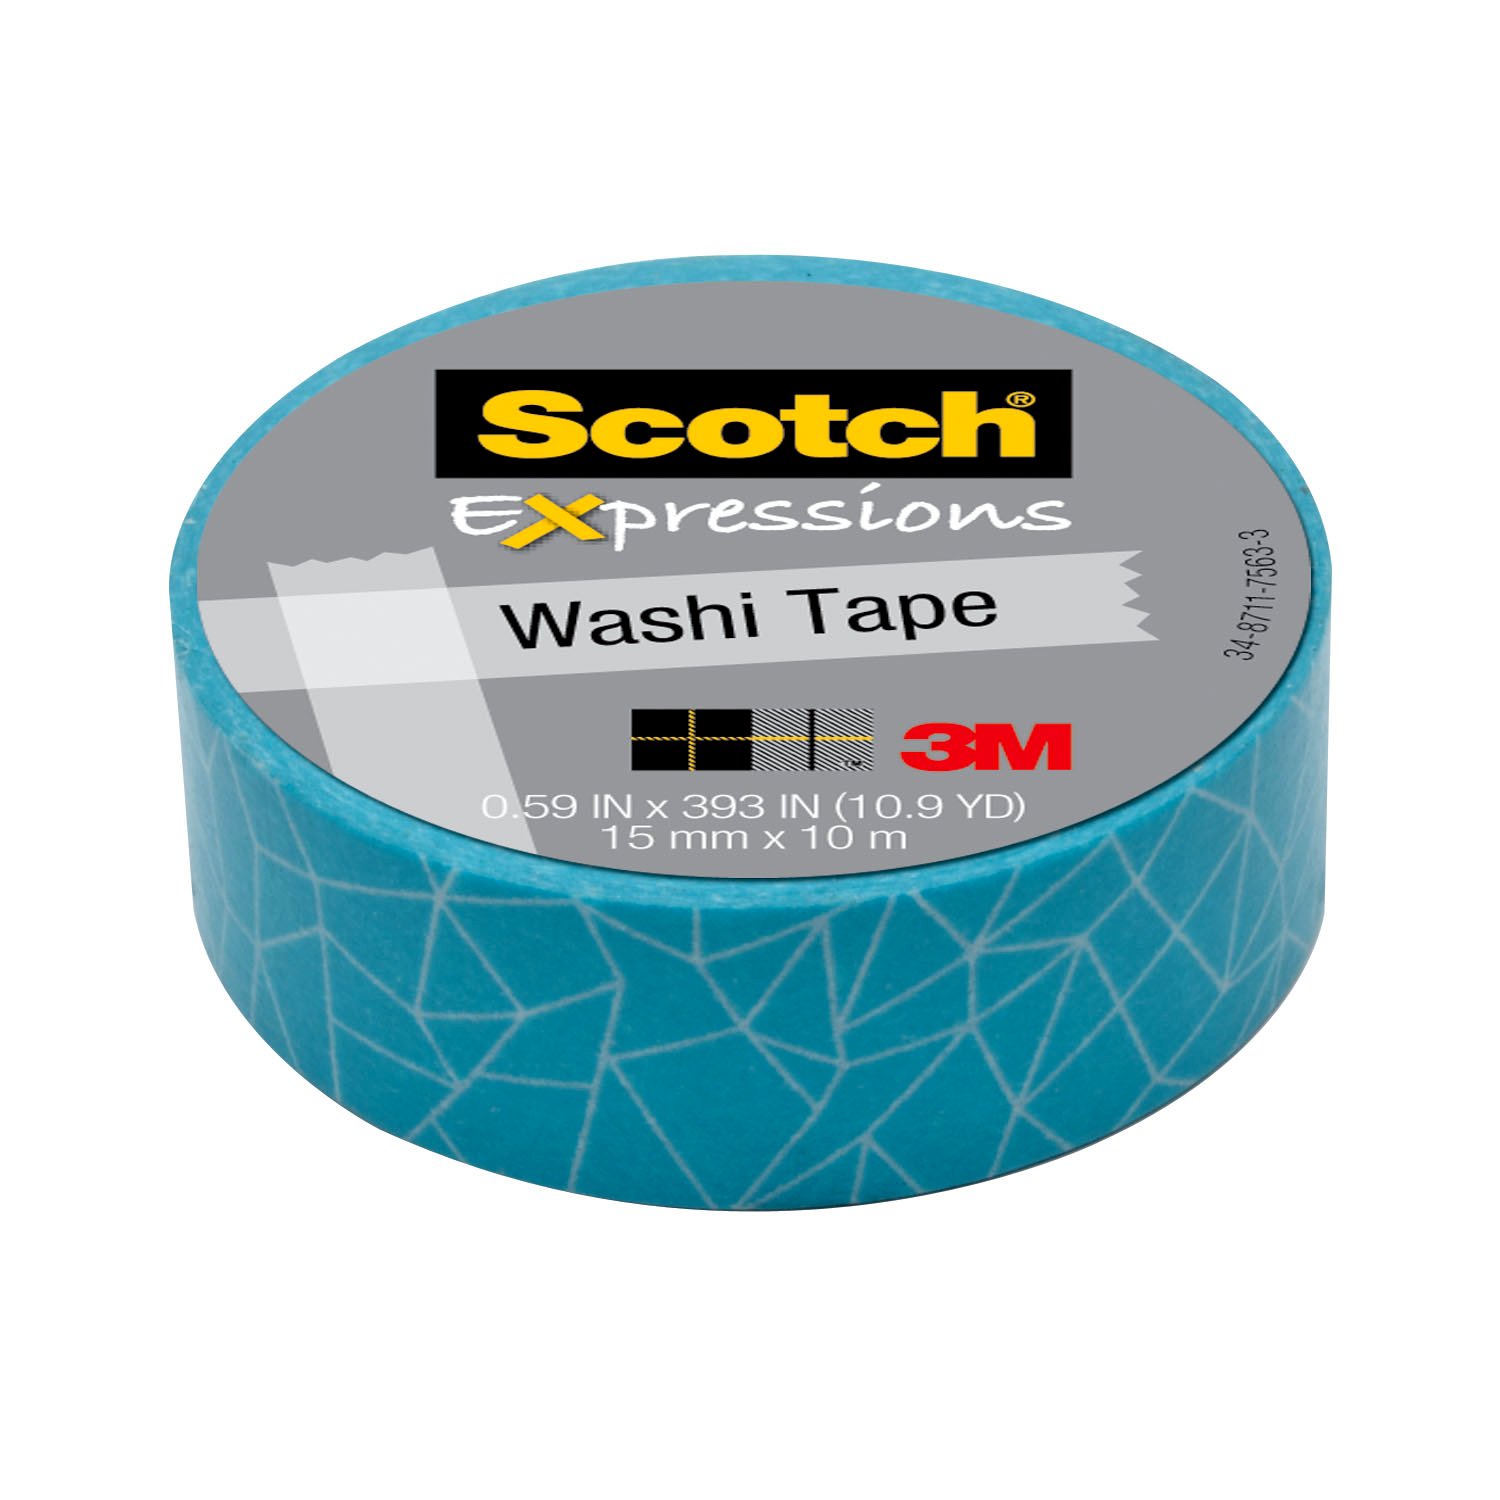 7000048139 - Scotch Expressions Washi Tape C314-P28, .59 in x 393 in (15 mm x 10 m)
Cracked